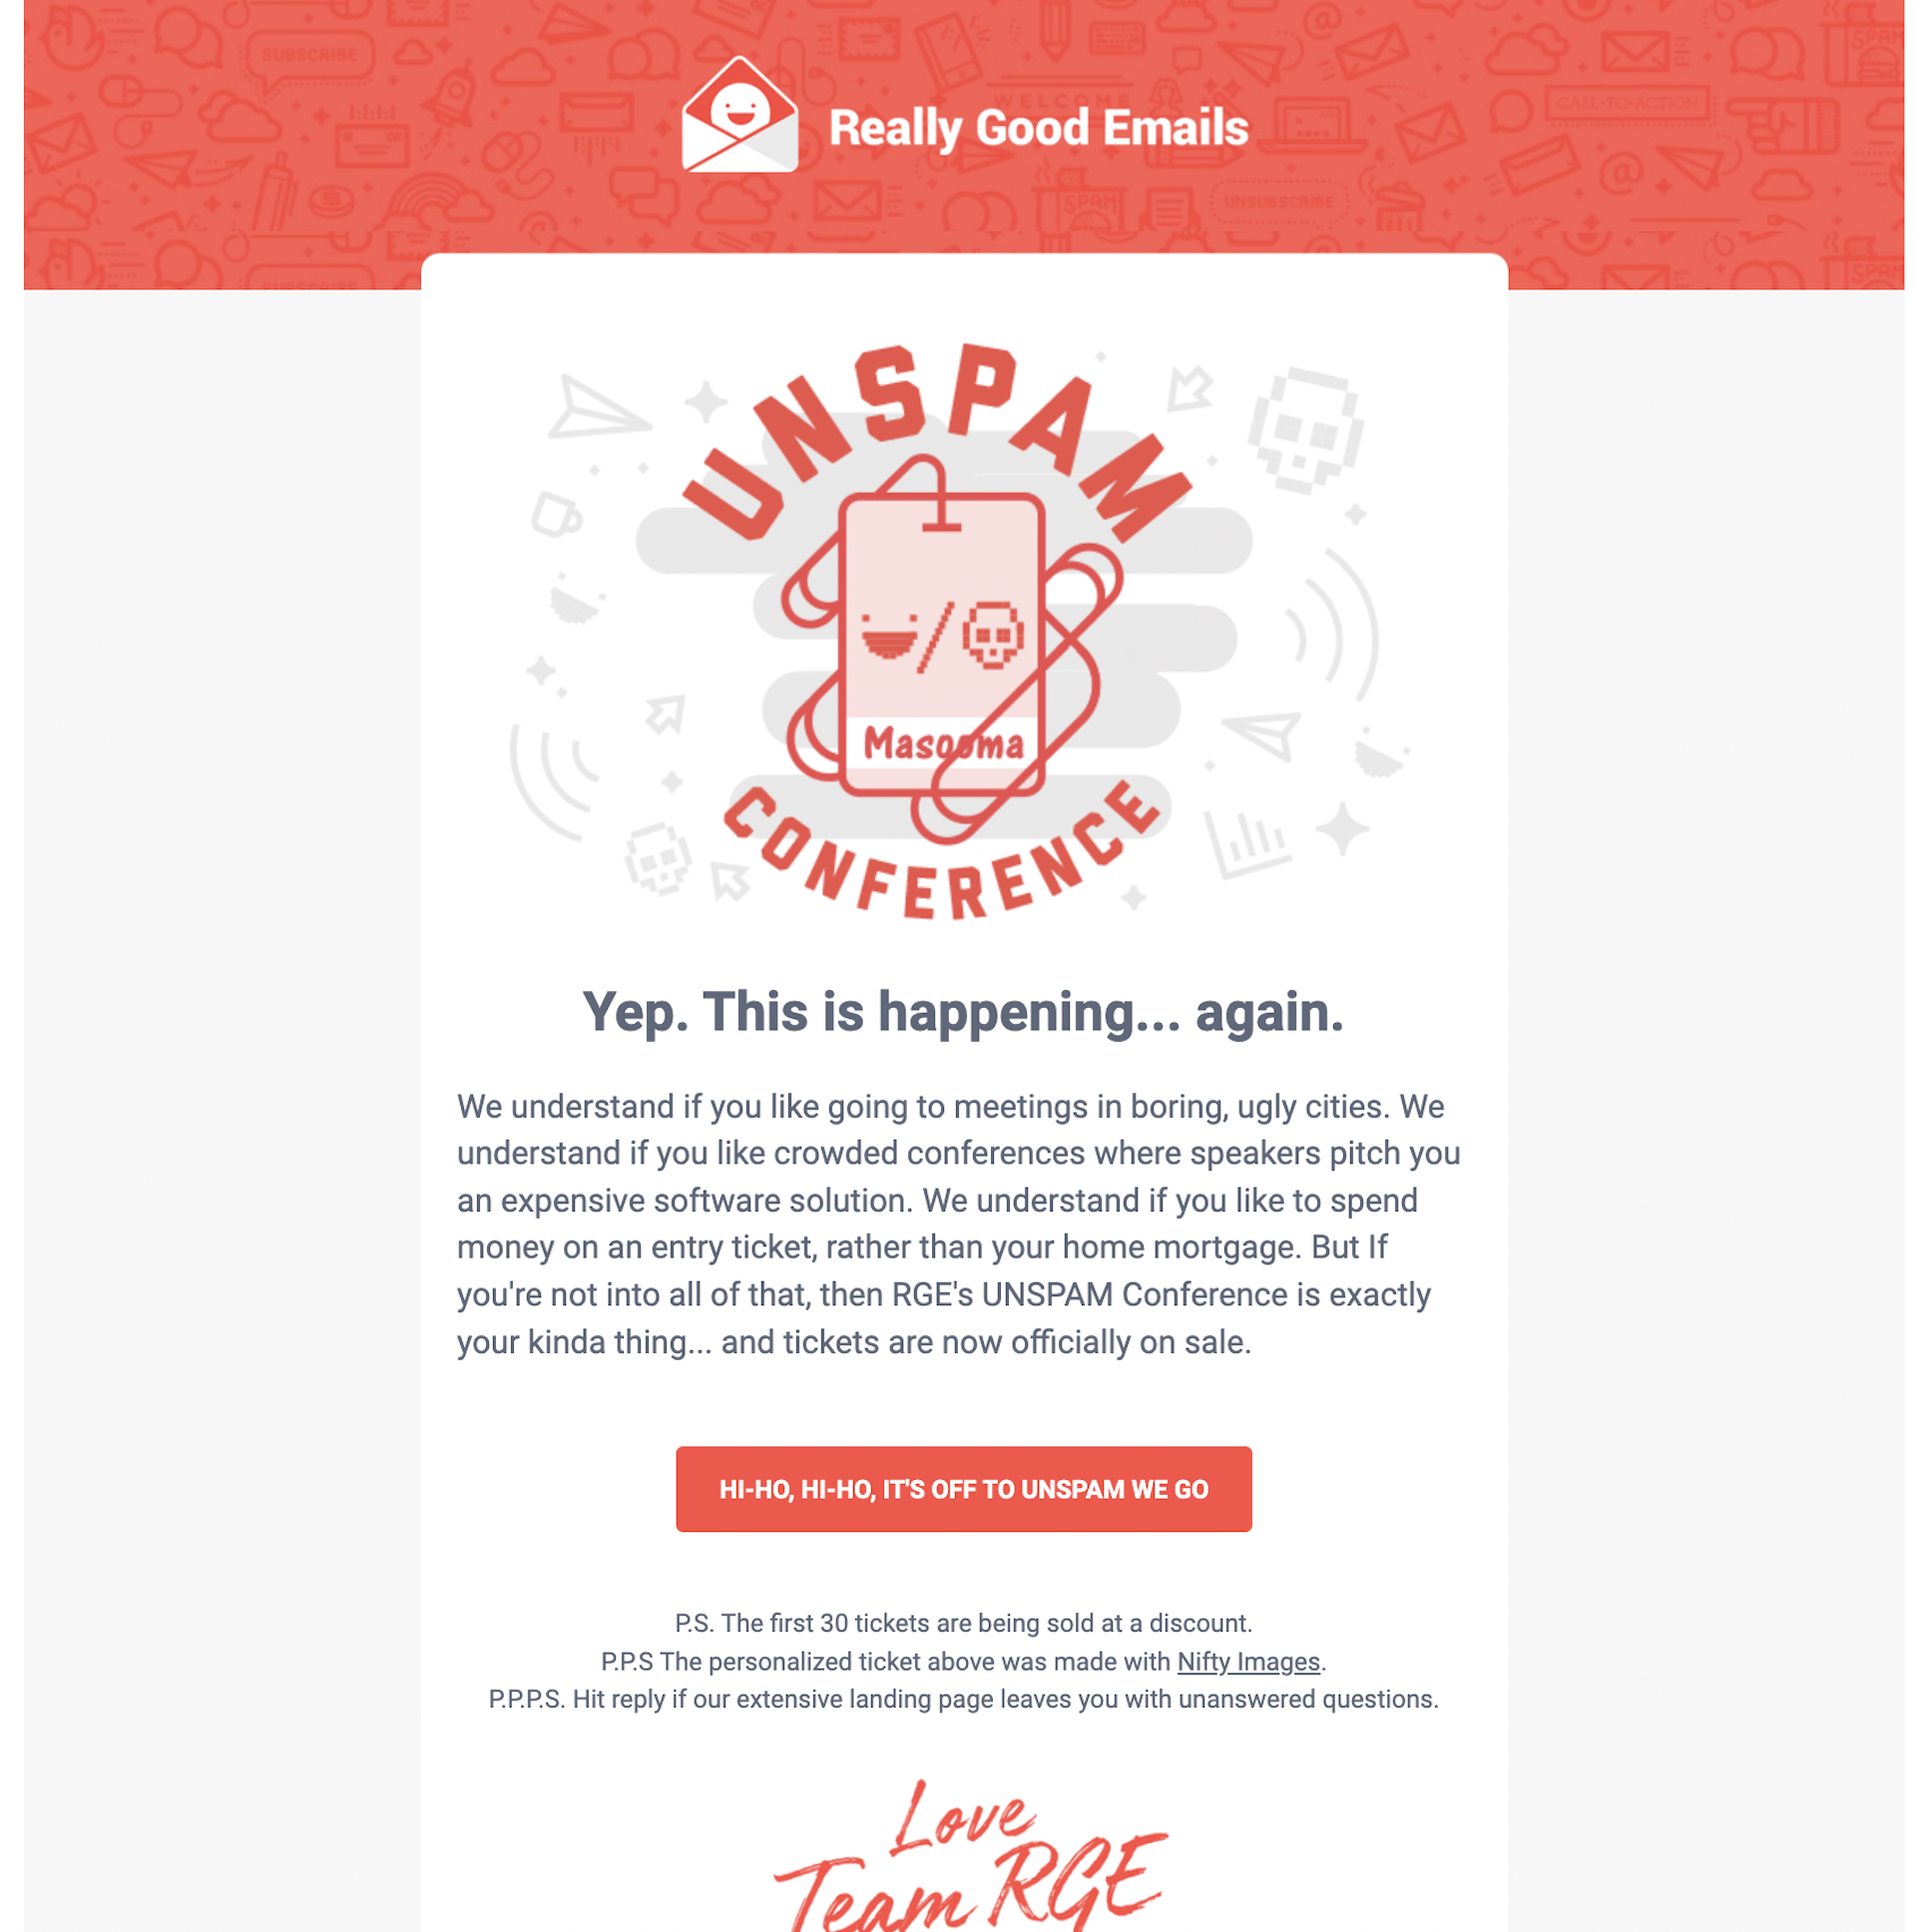 Really Good Emails Unspam event invite